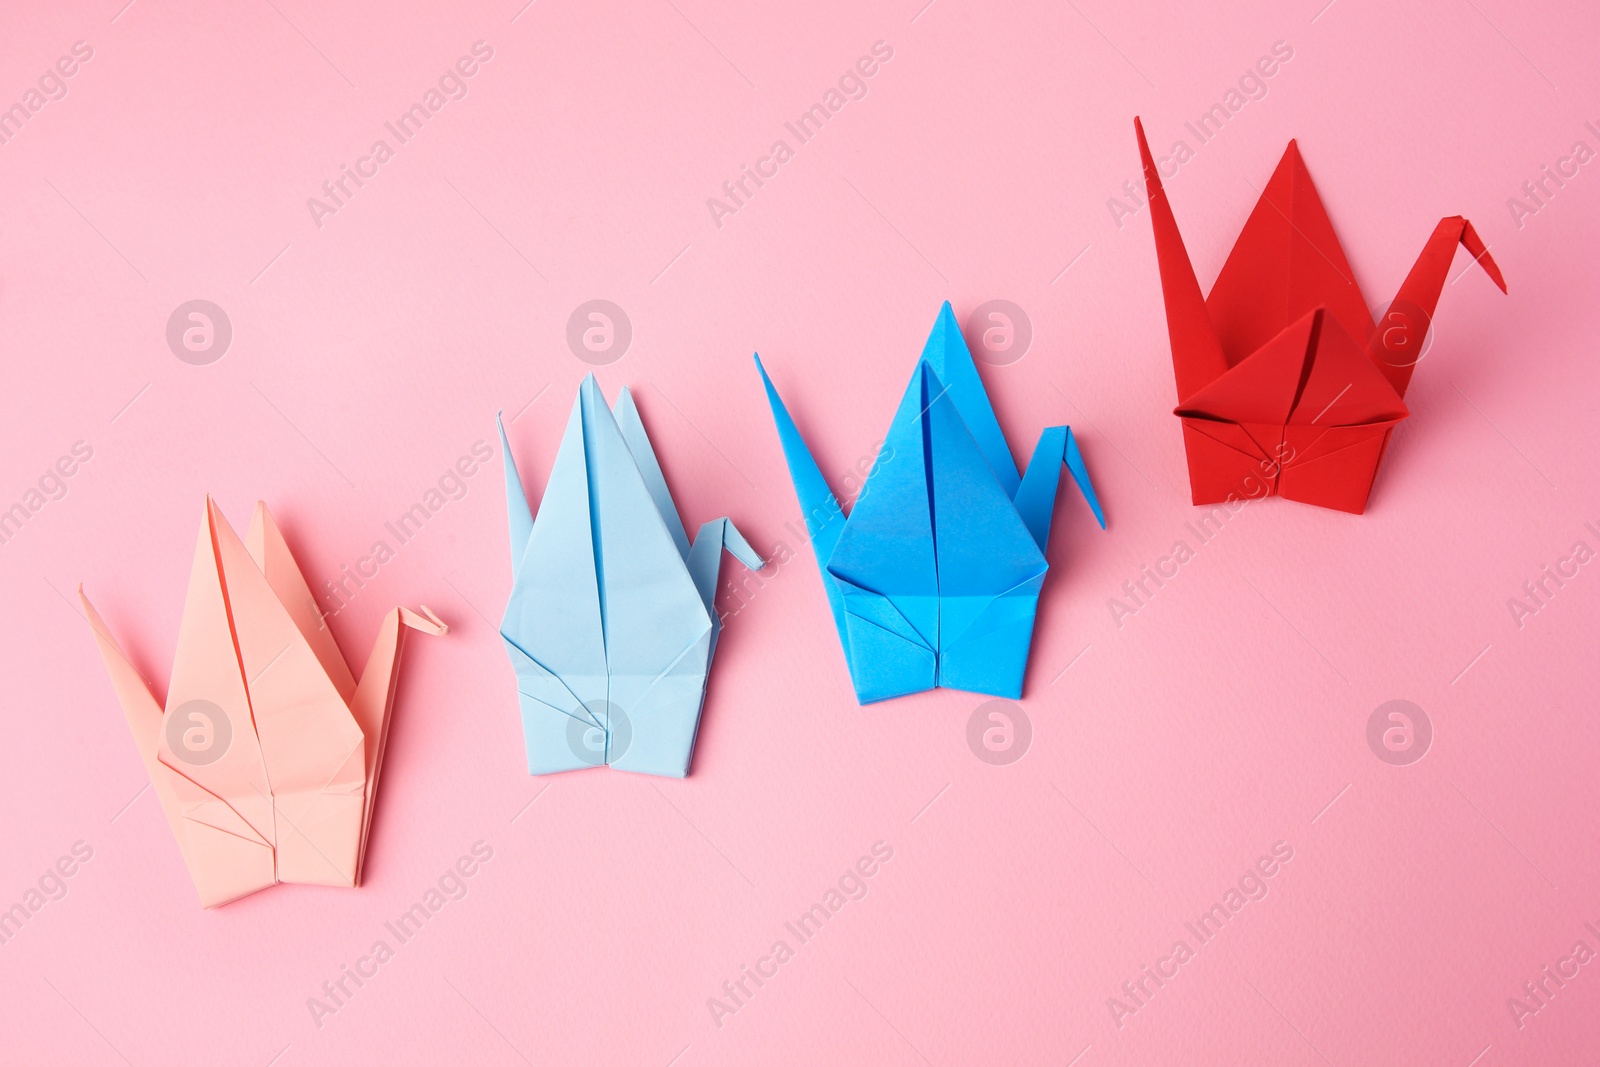 Photo of Colorful paper origami cranes on pink background, flat lay